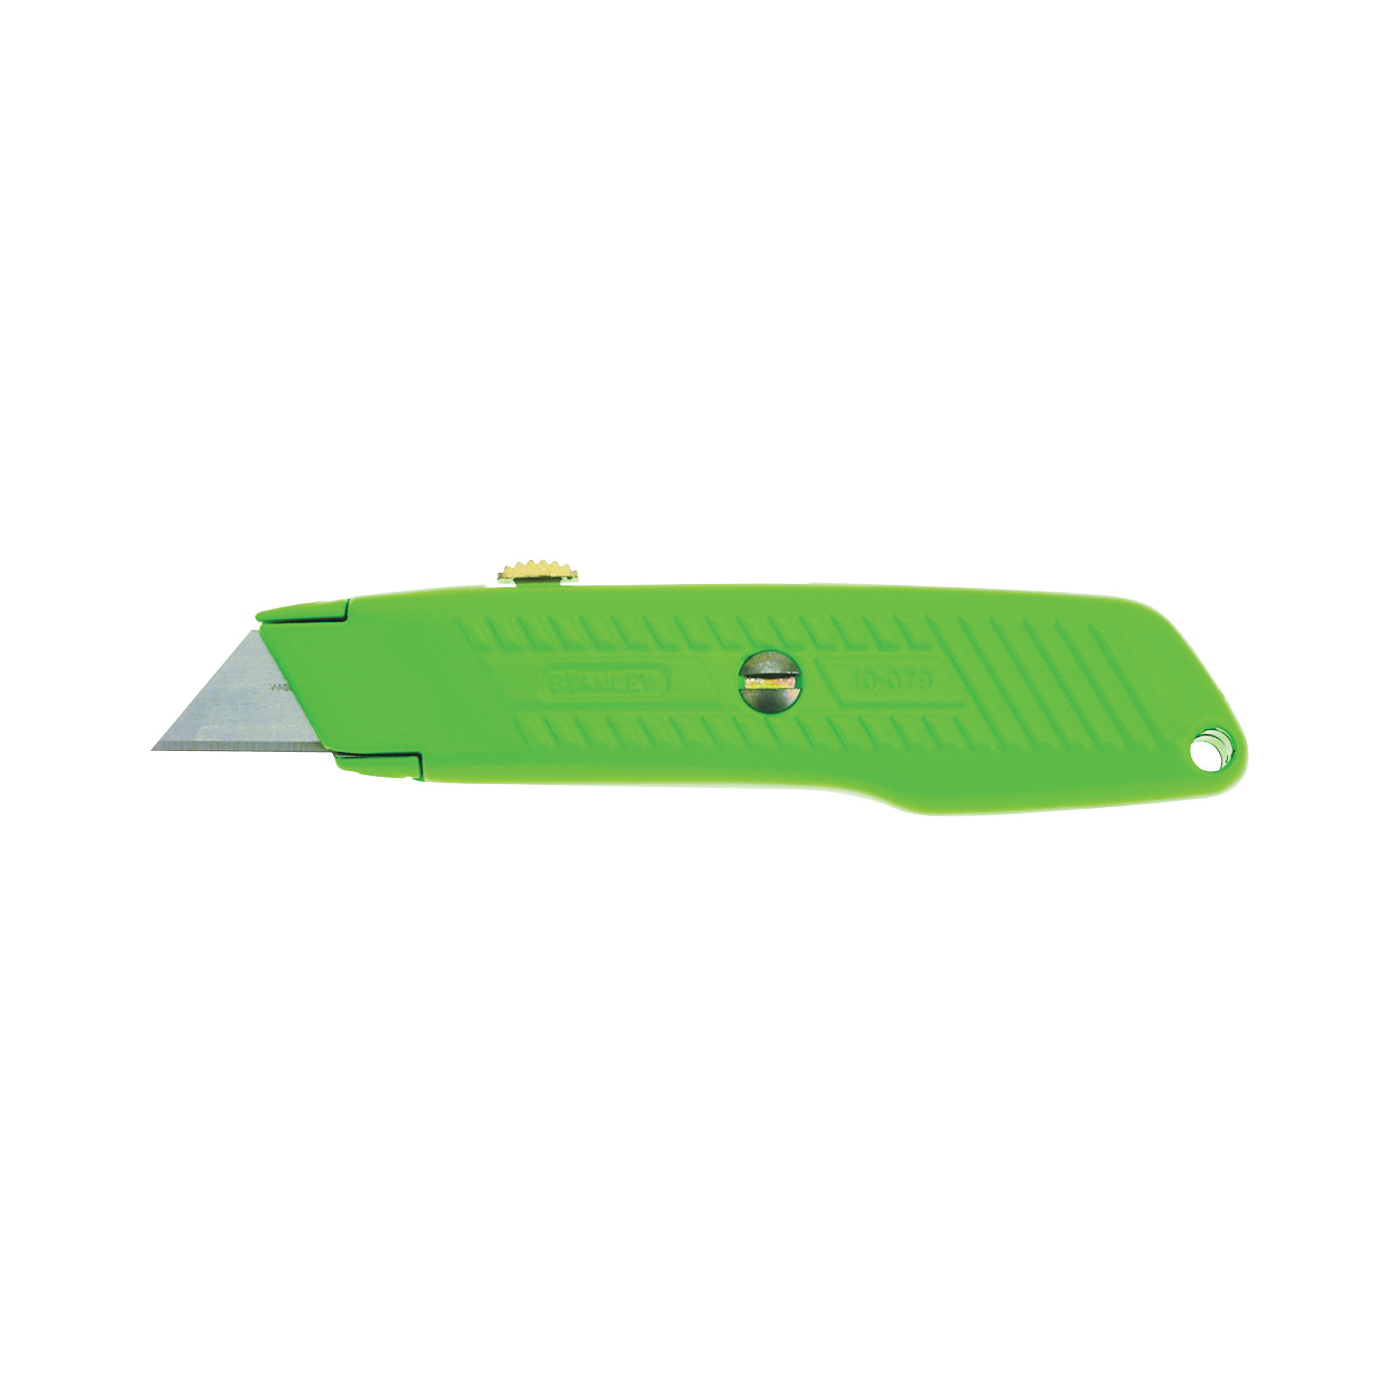 Stanley 10-179 Utility Knife, 2-7/16 in L Blade, 3 in W Blade, HCS Blade, Contour-Grip Handle, Green Handle